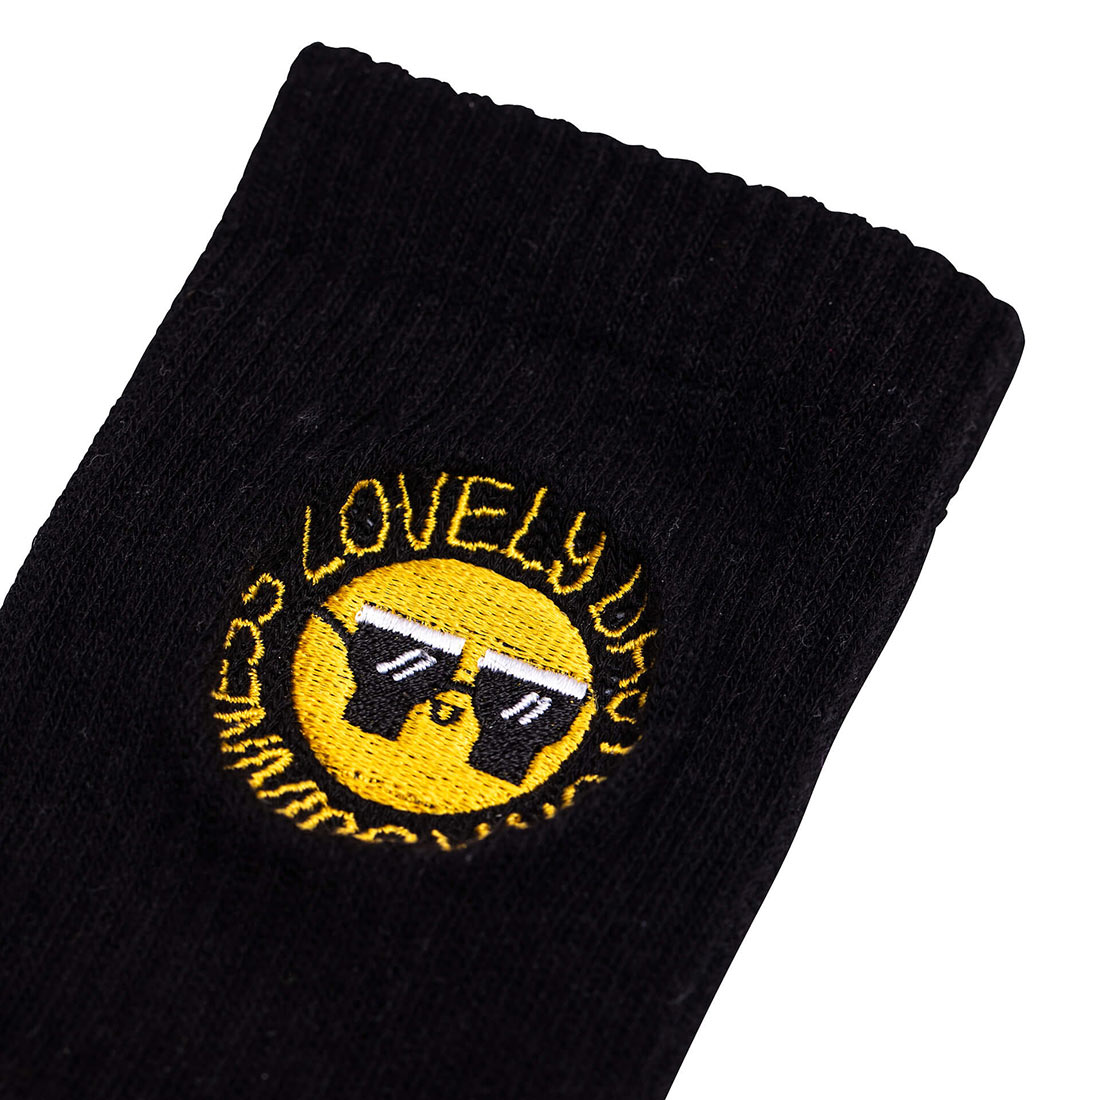 A comfortable and stylish FATTI BURKE "LOVELY DAY FOR A GUINNESS" black sock with a smiley face on it. (Brand Name: Guinness Webstore UK)